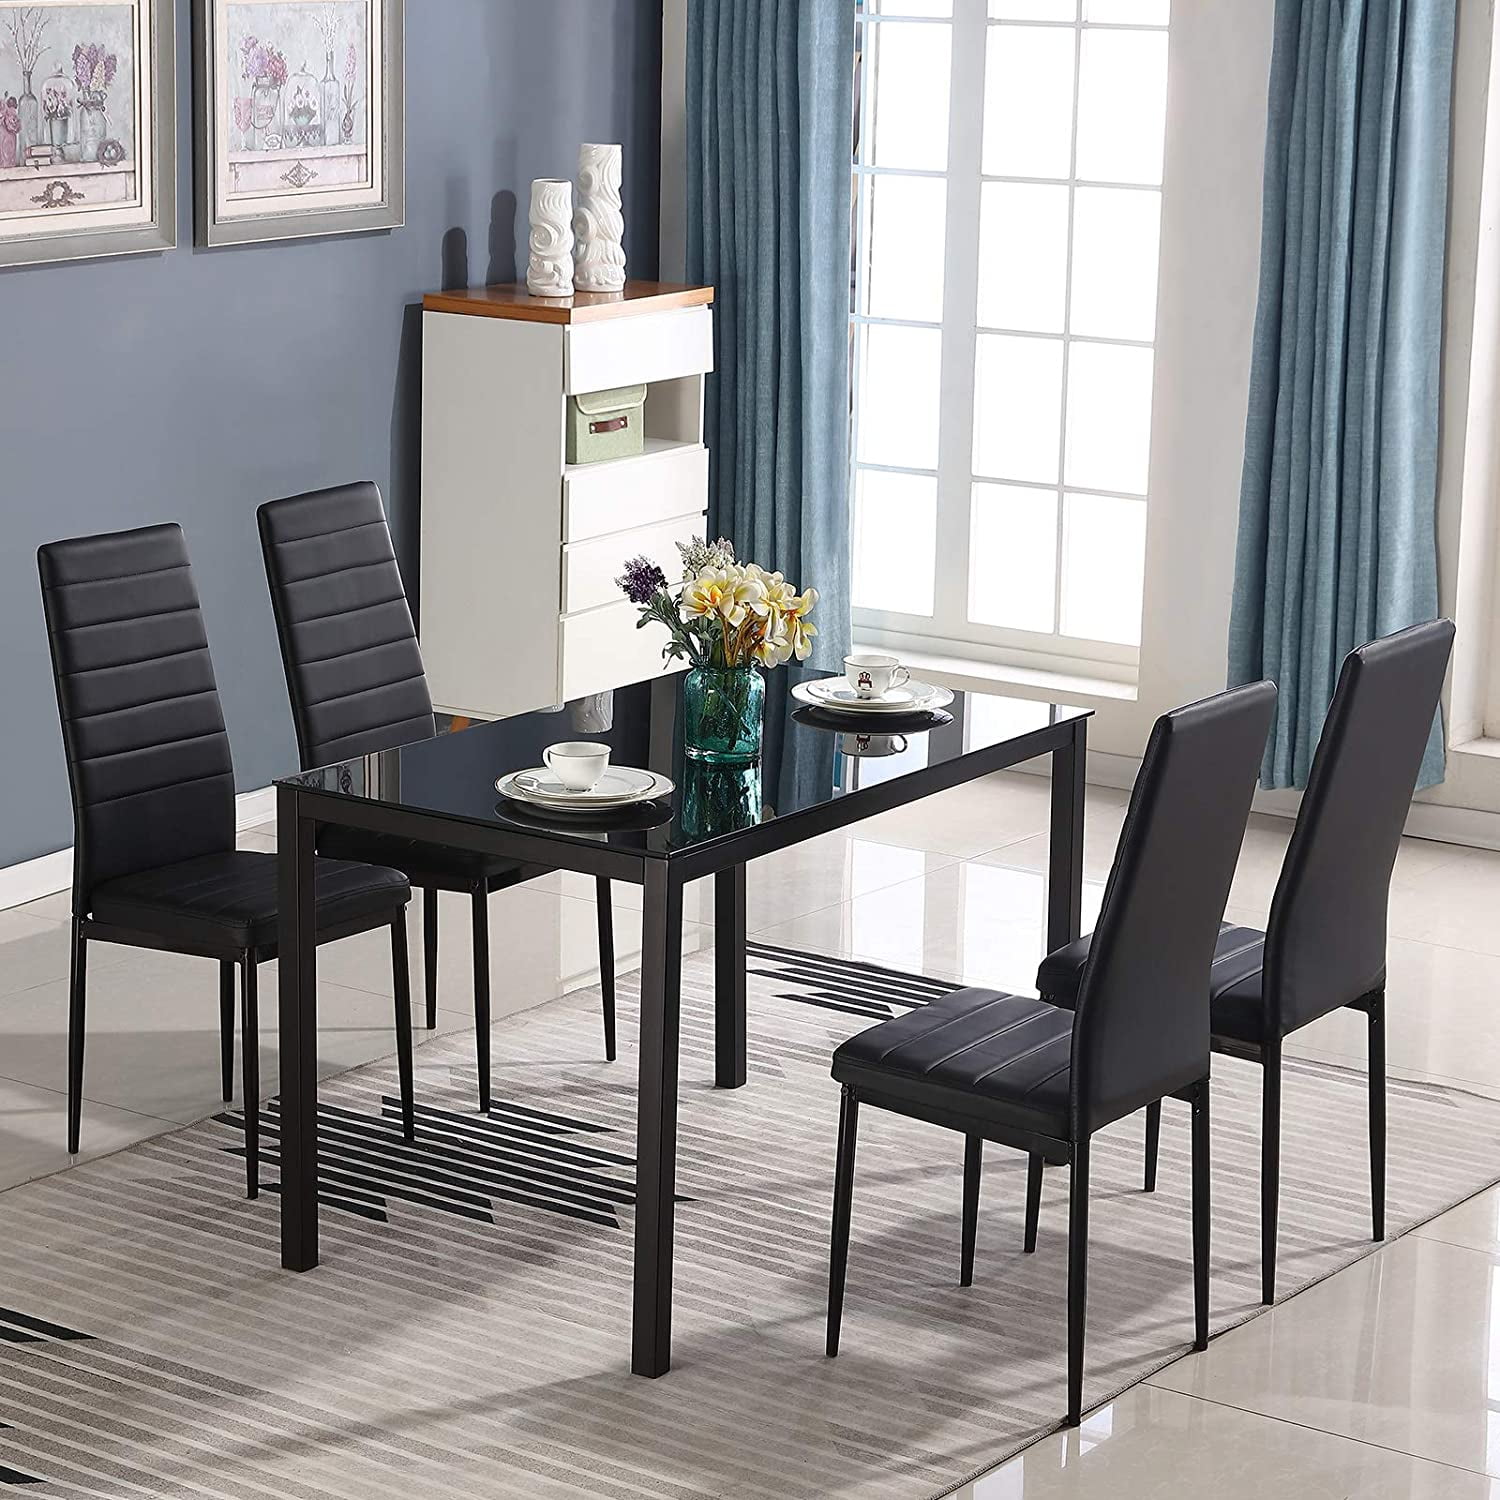 Dining Table Set For 4, Glass Top Dining Table With 4 Pu Leather Chairs